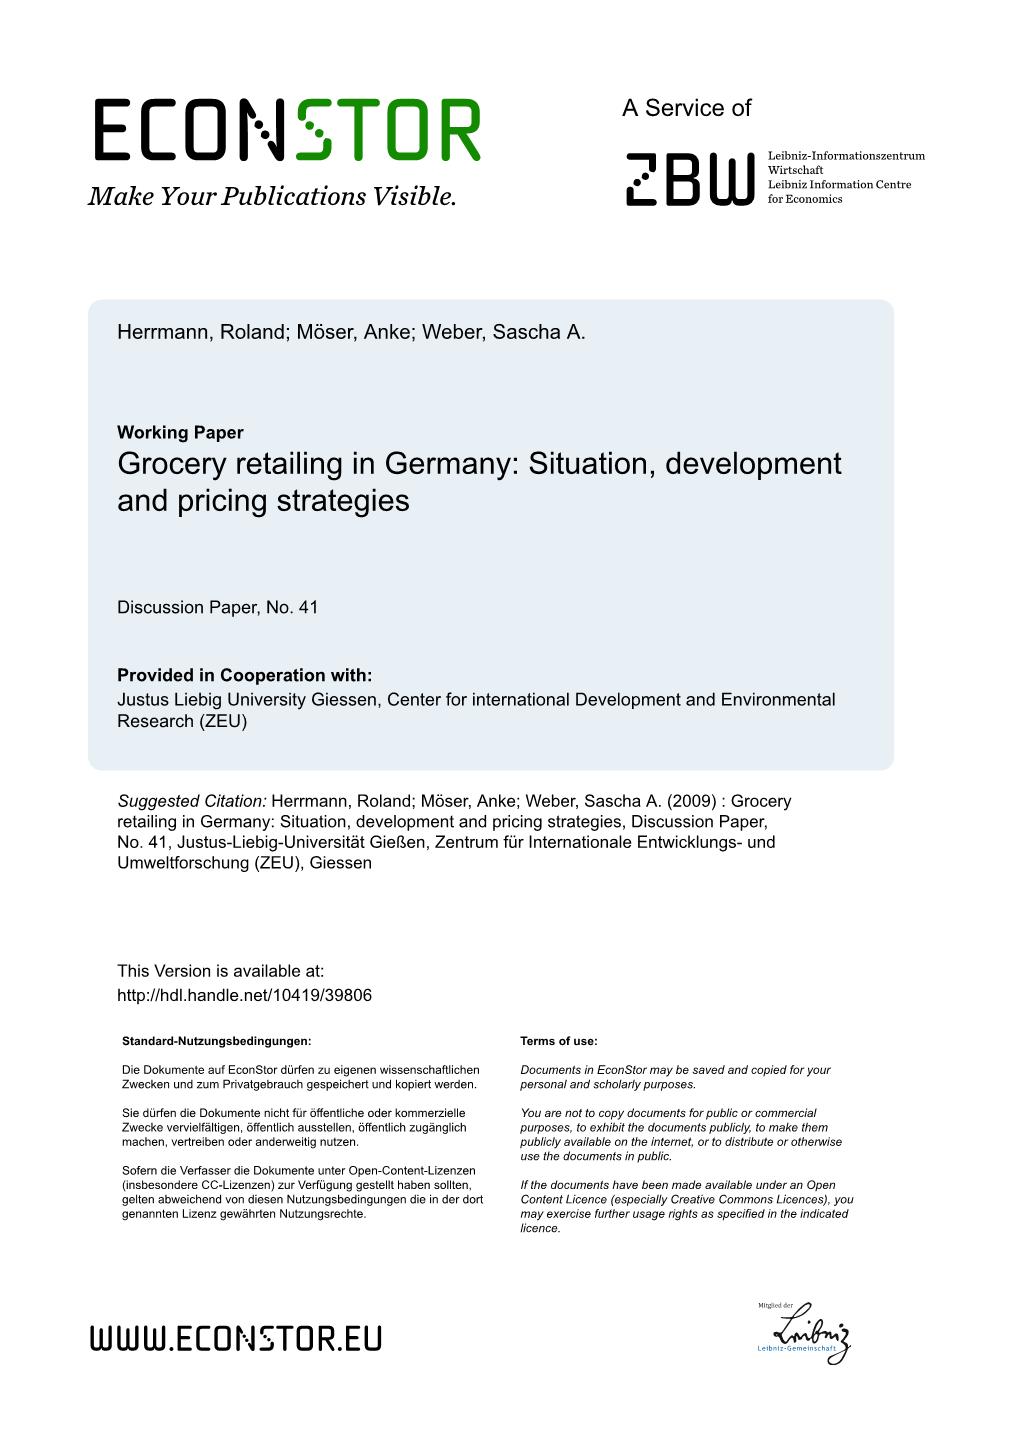 Grocery Retailing in Germany: Situation, Development and Pricing Strategies